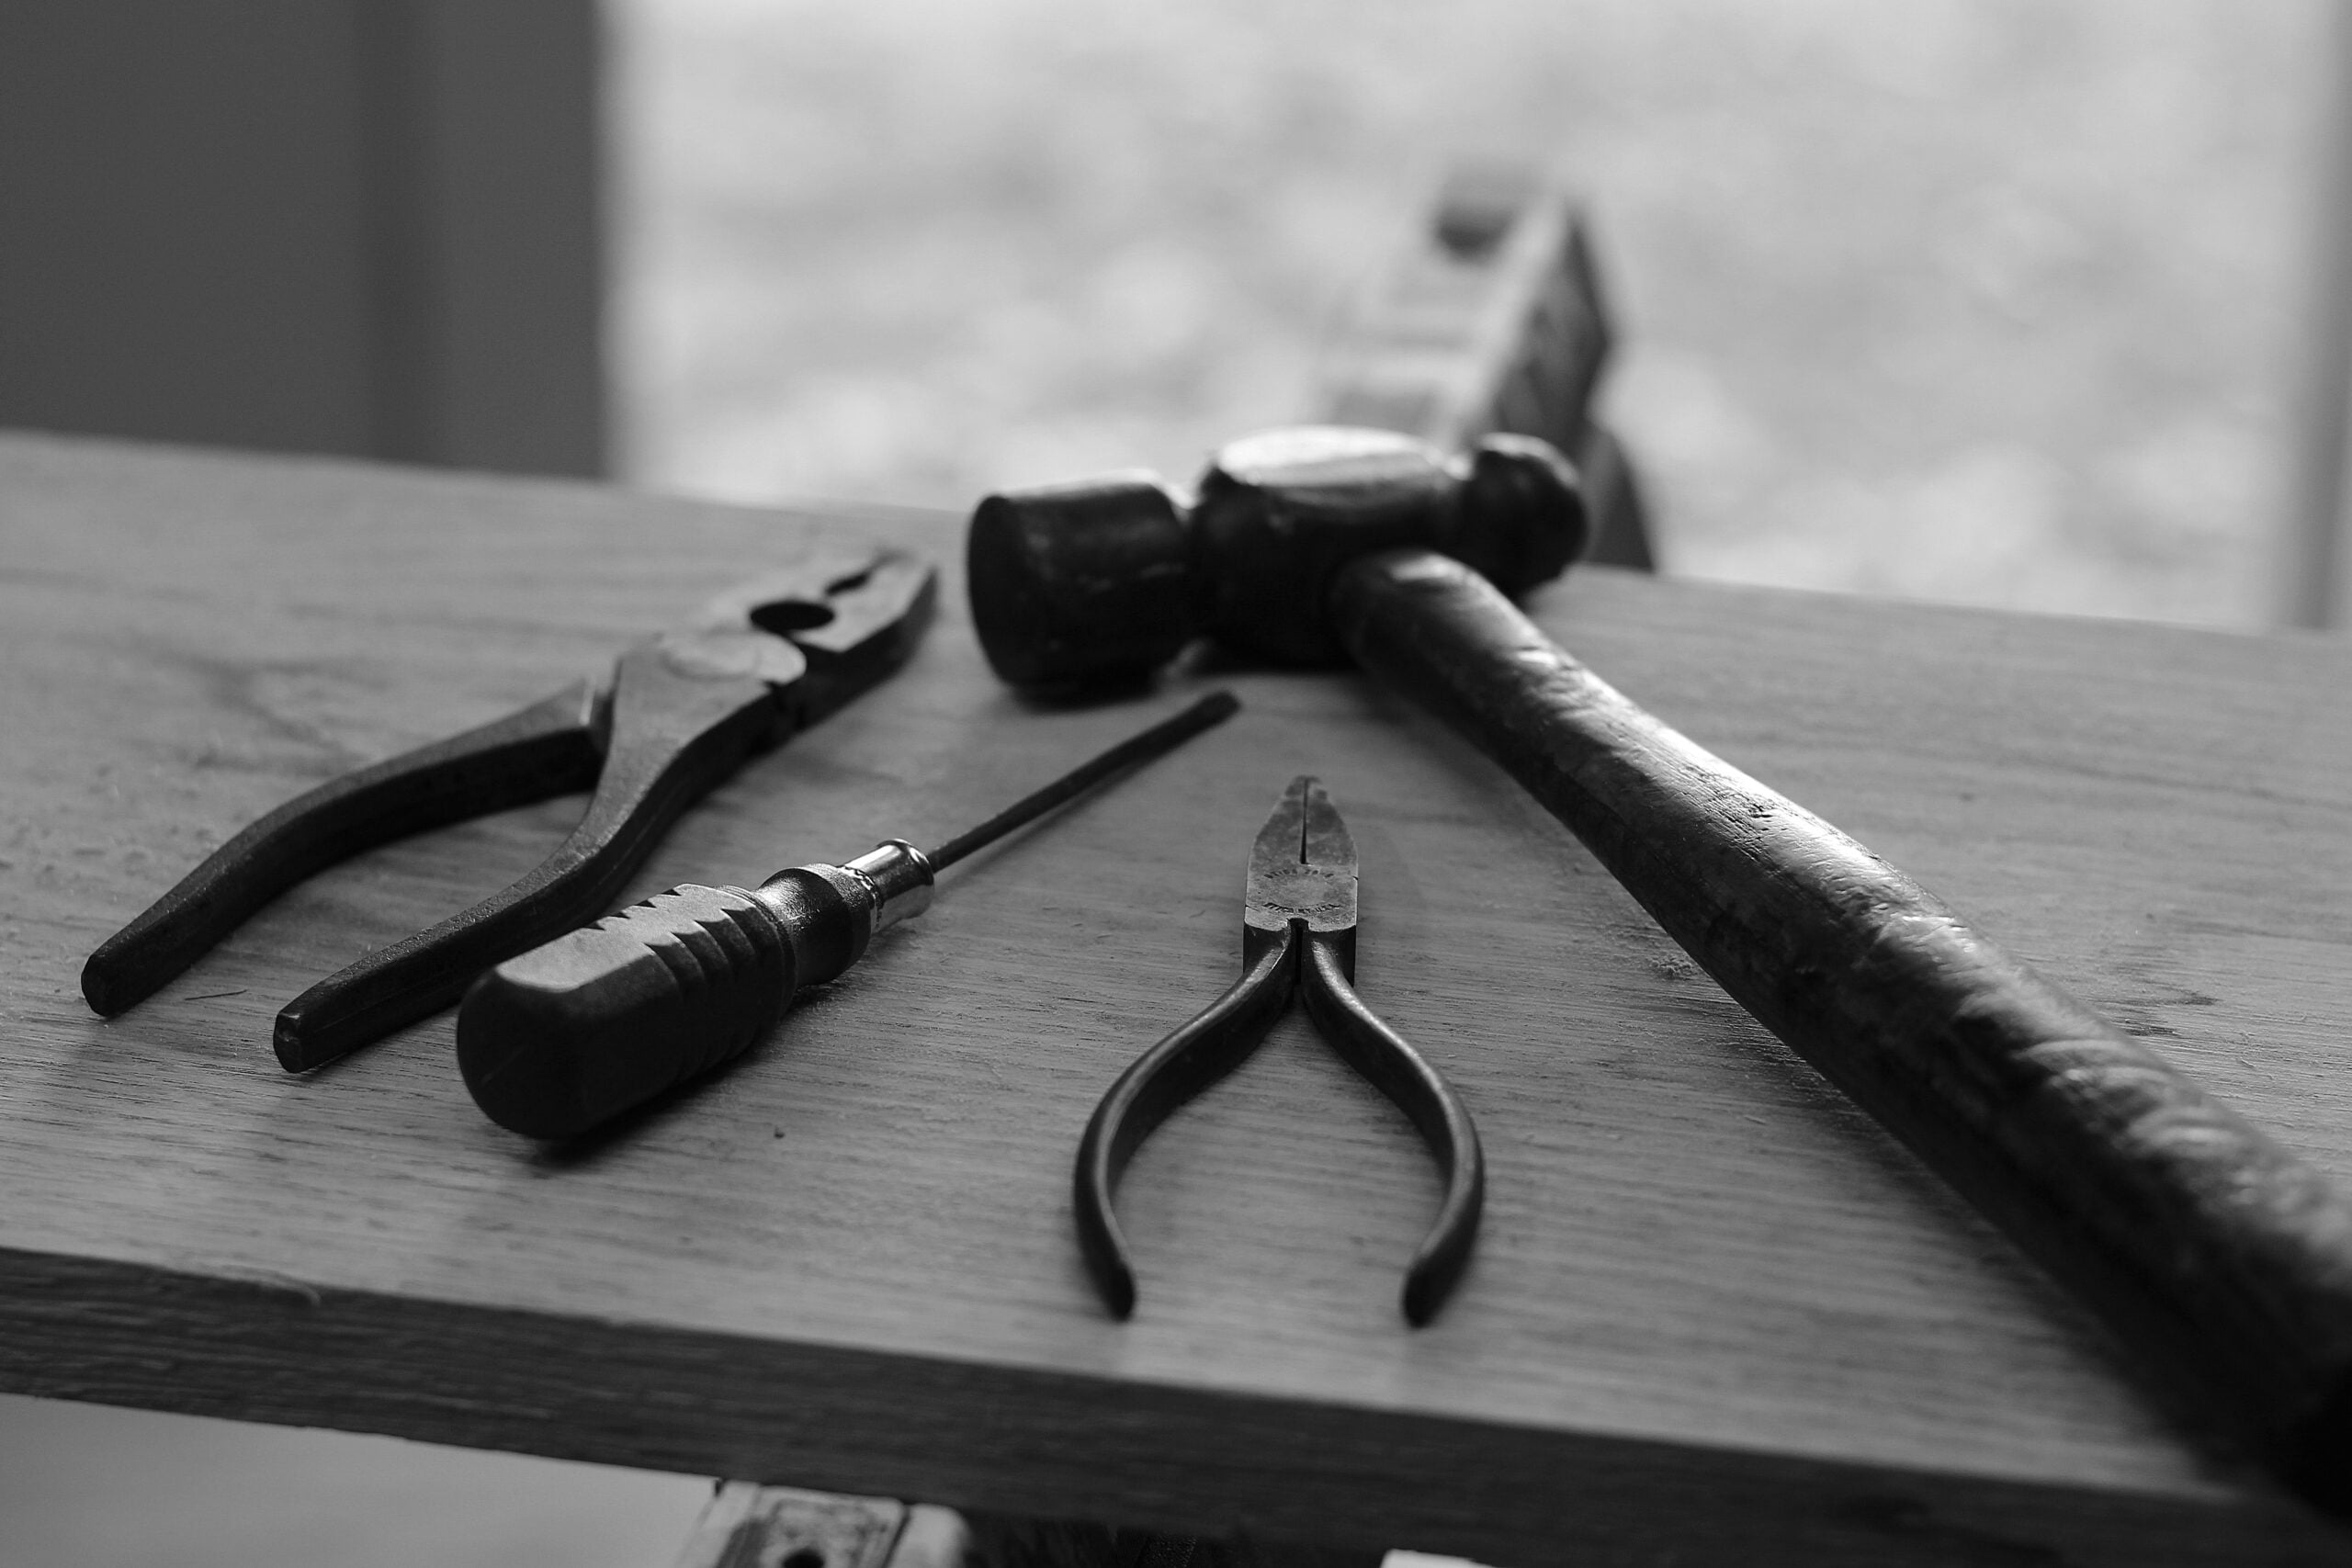 A hammer, pliers and other tools on a piece of wood